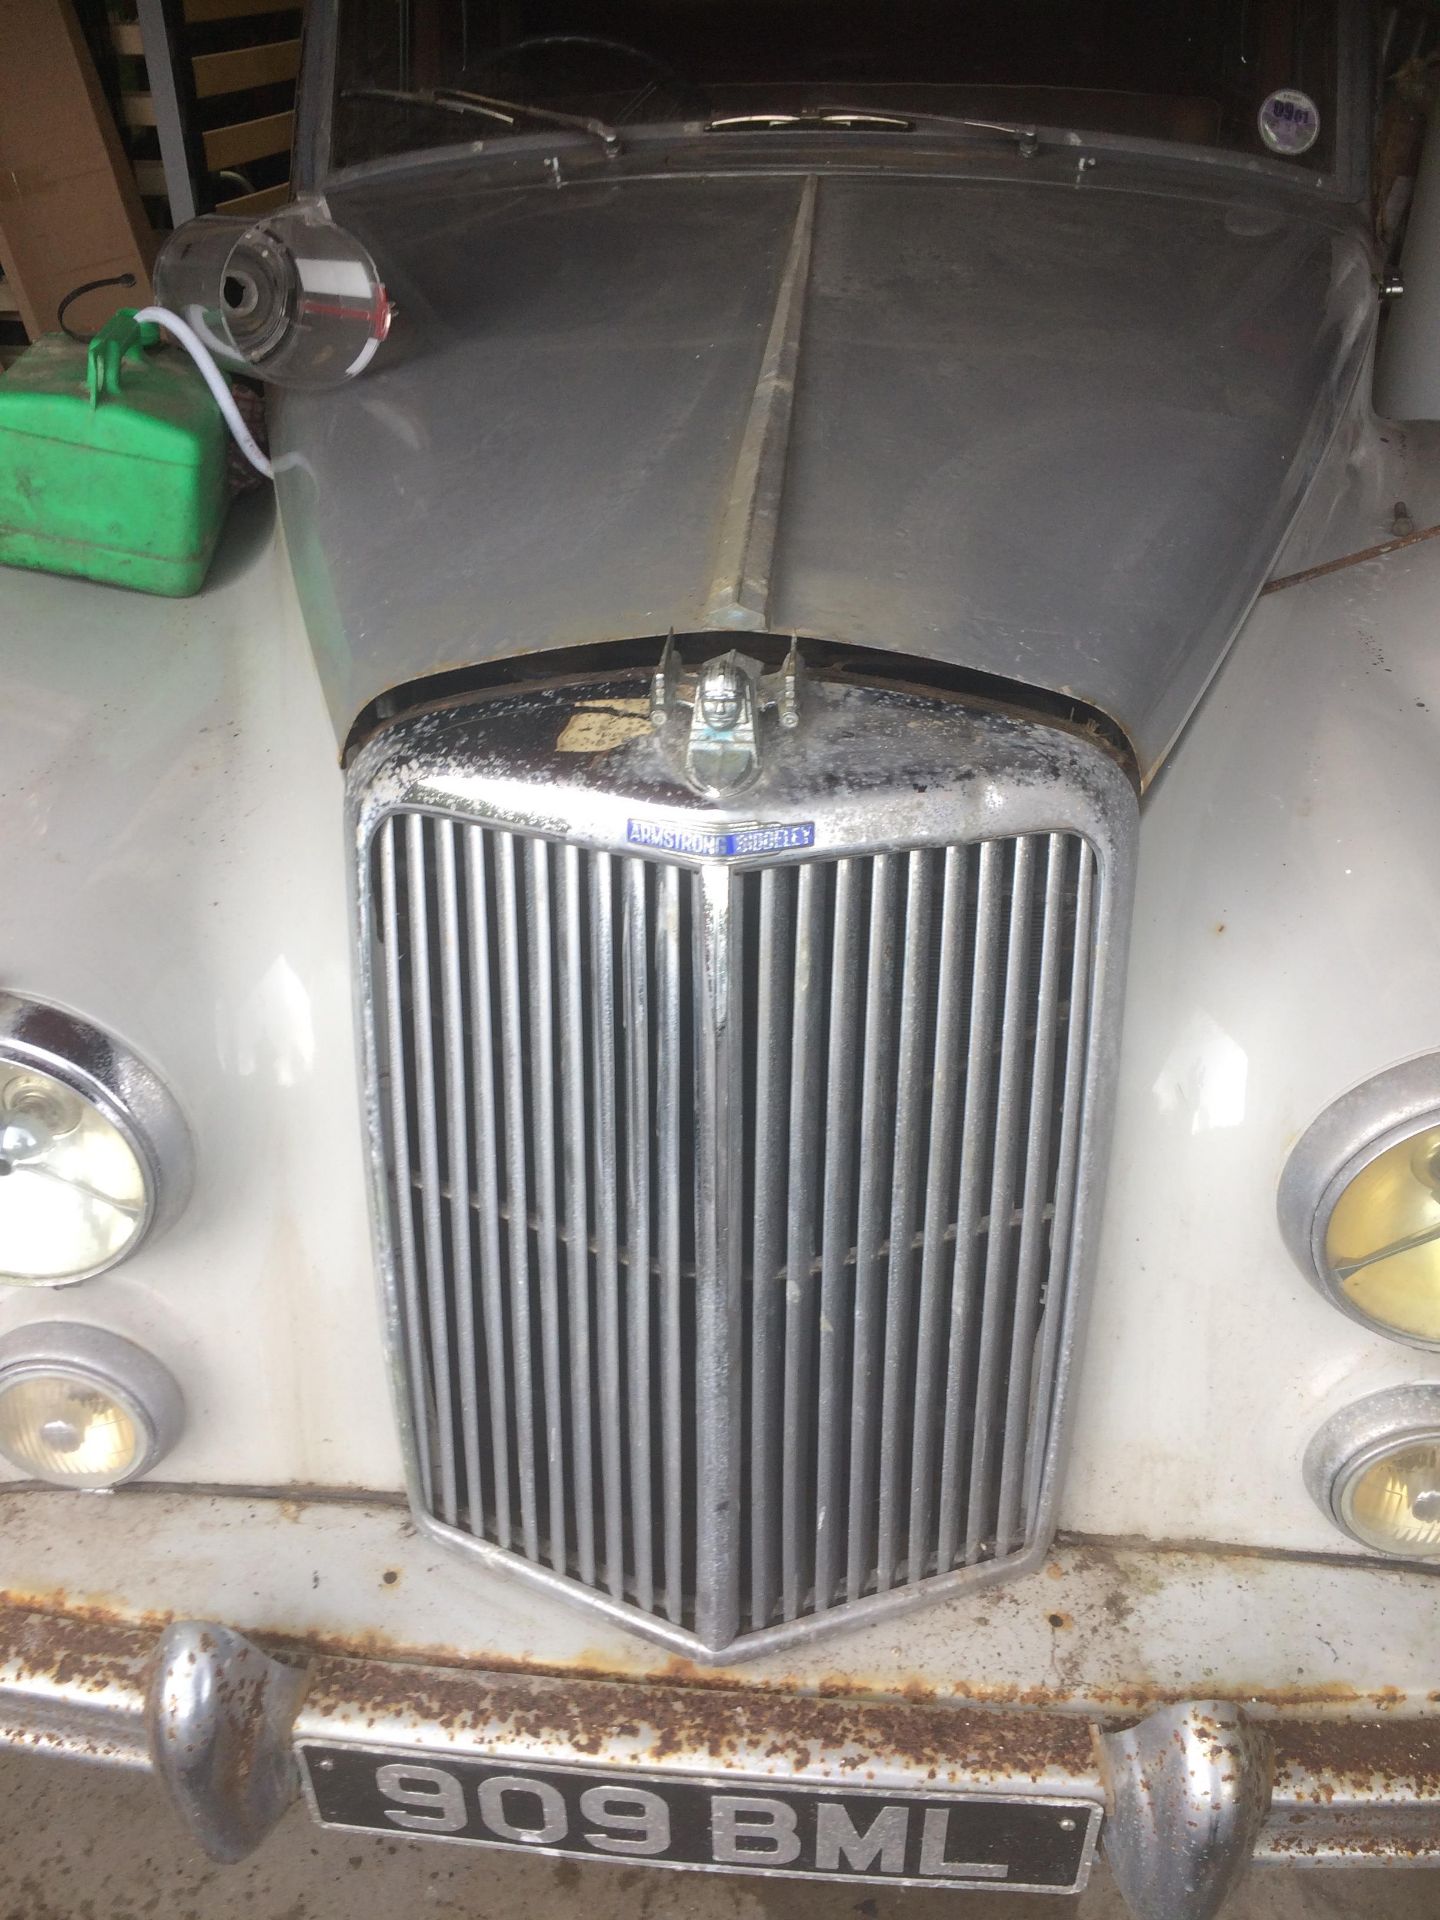 Armstrong Siddley Sapphire.1952.light restoration project - Image 2 of 8